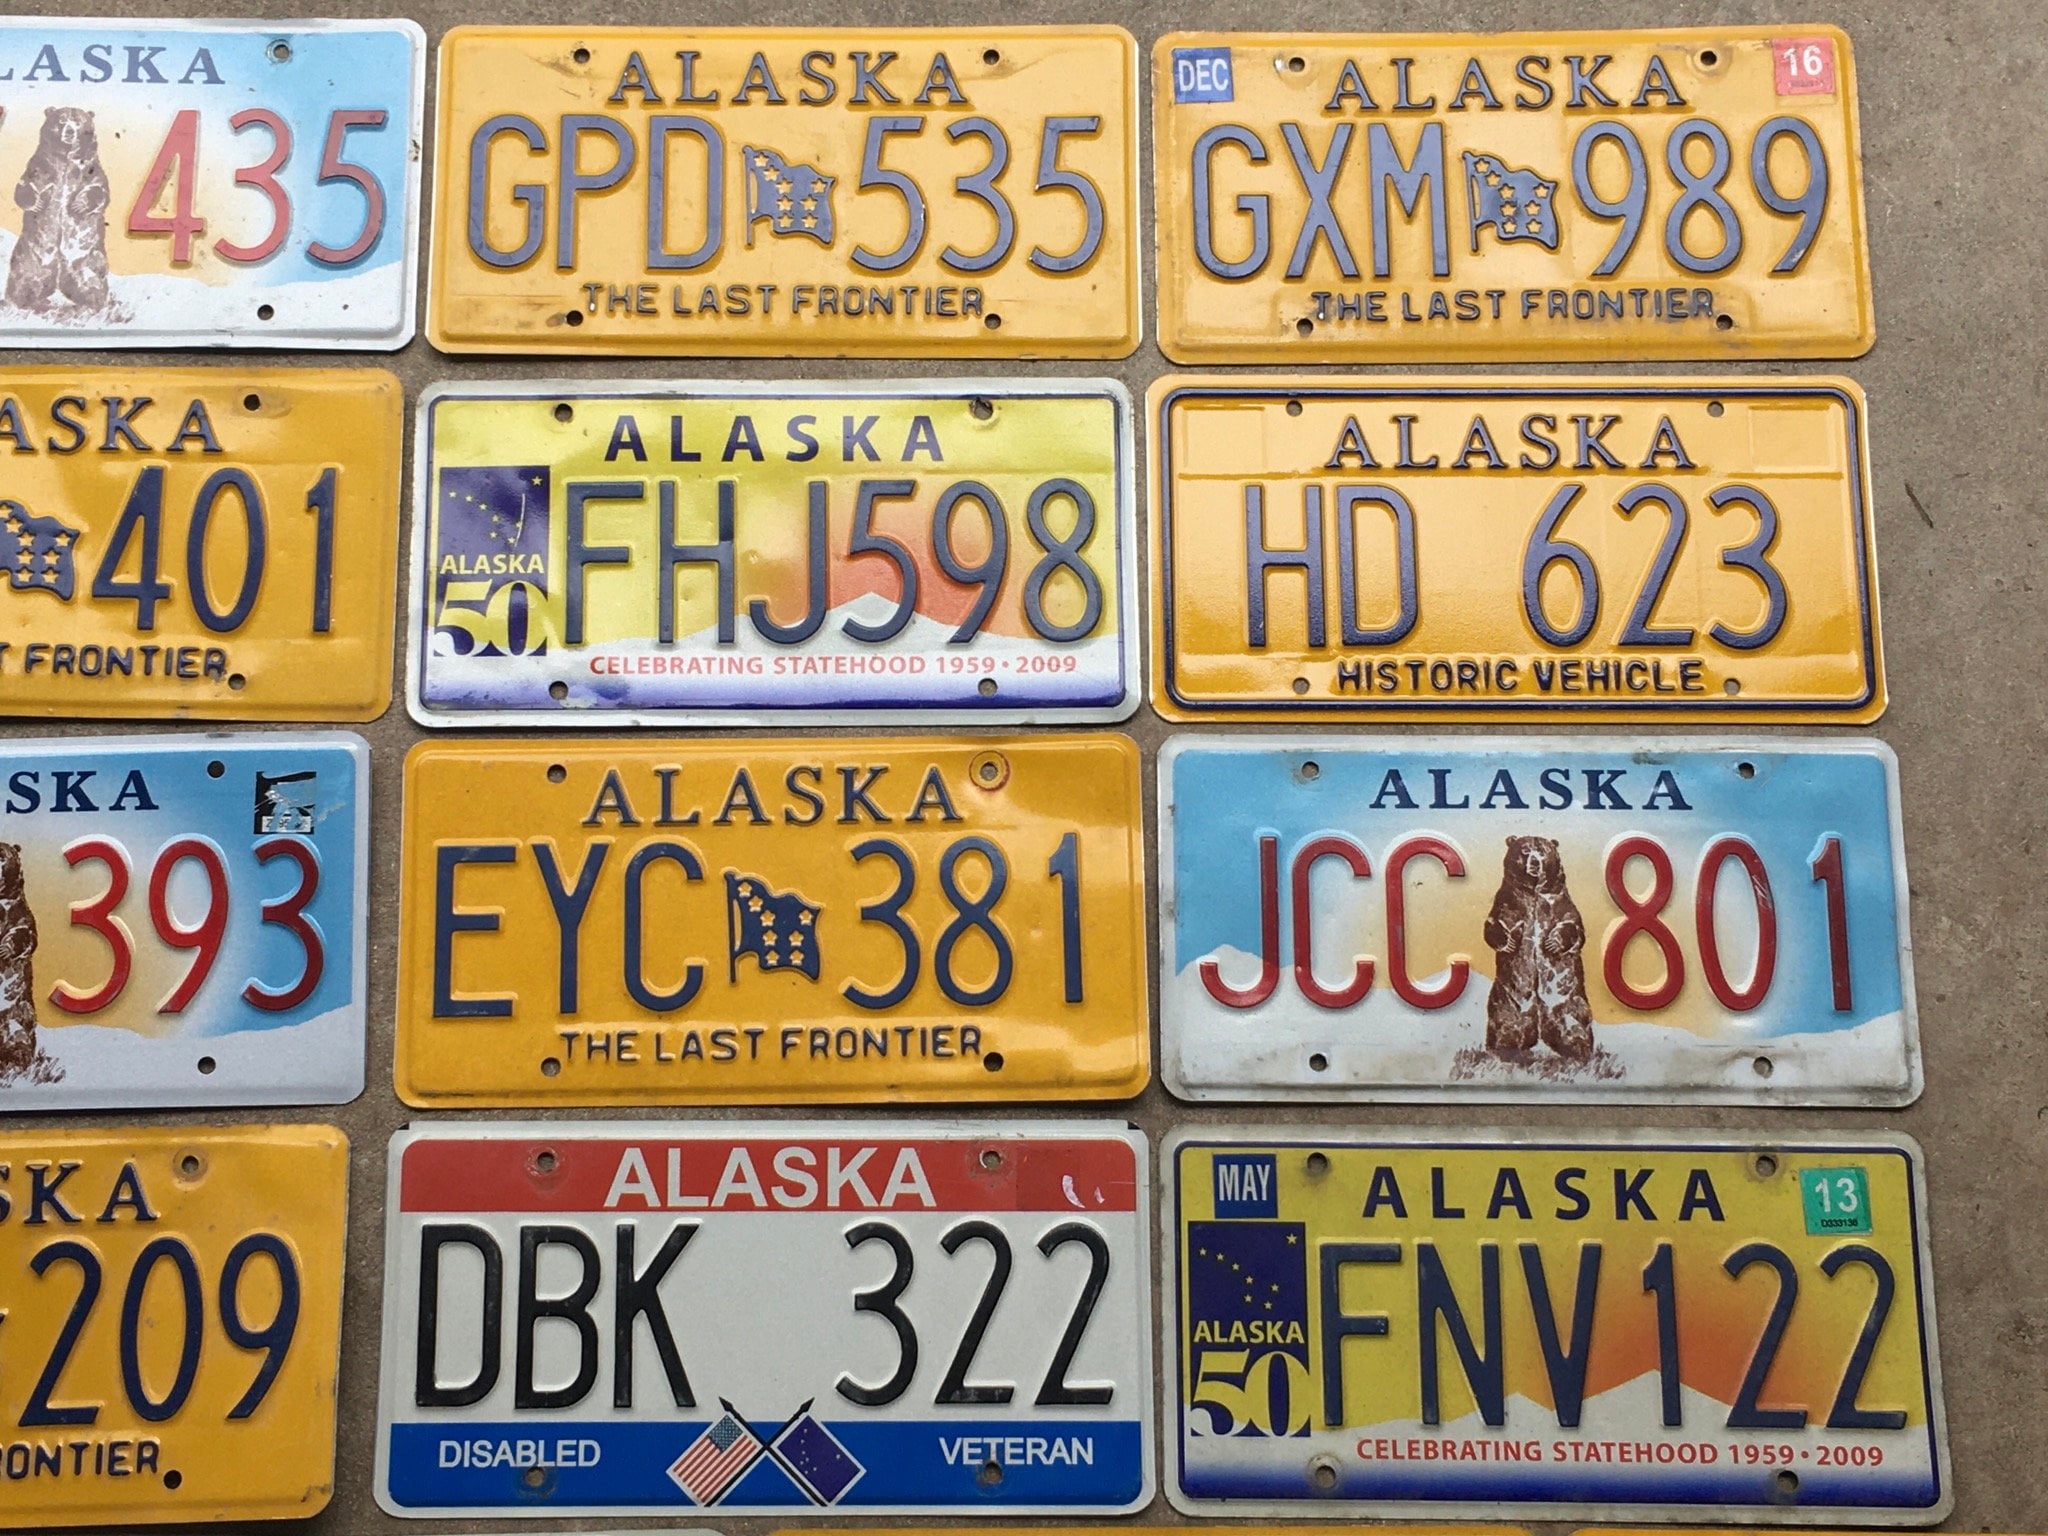 Alaska Rusted US Metal License Plate Personalise your own plate 